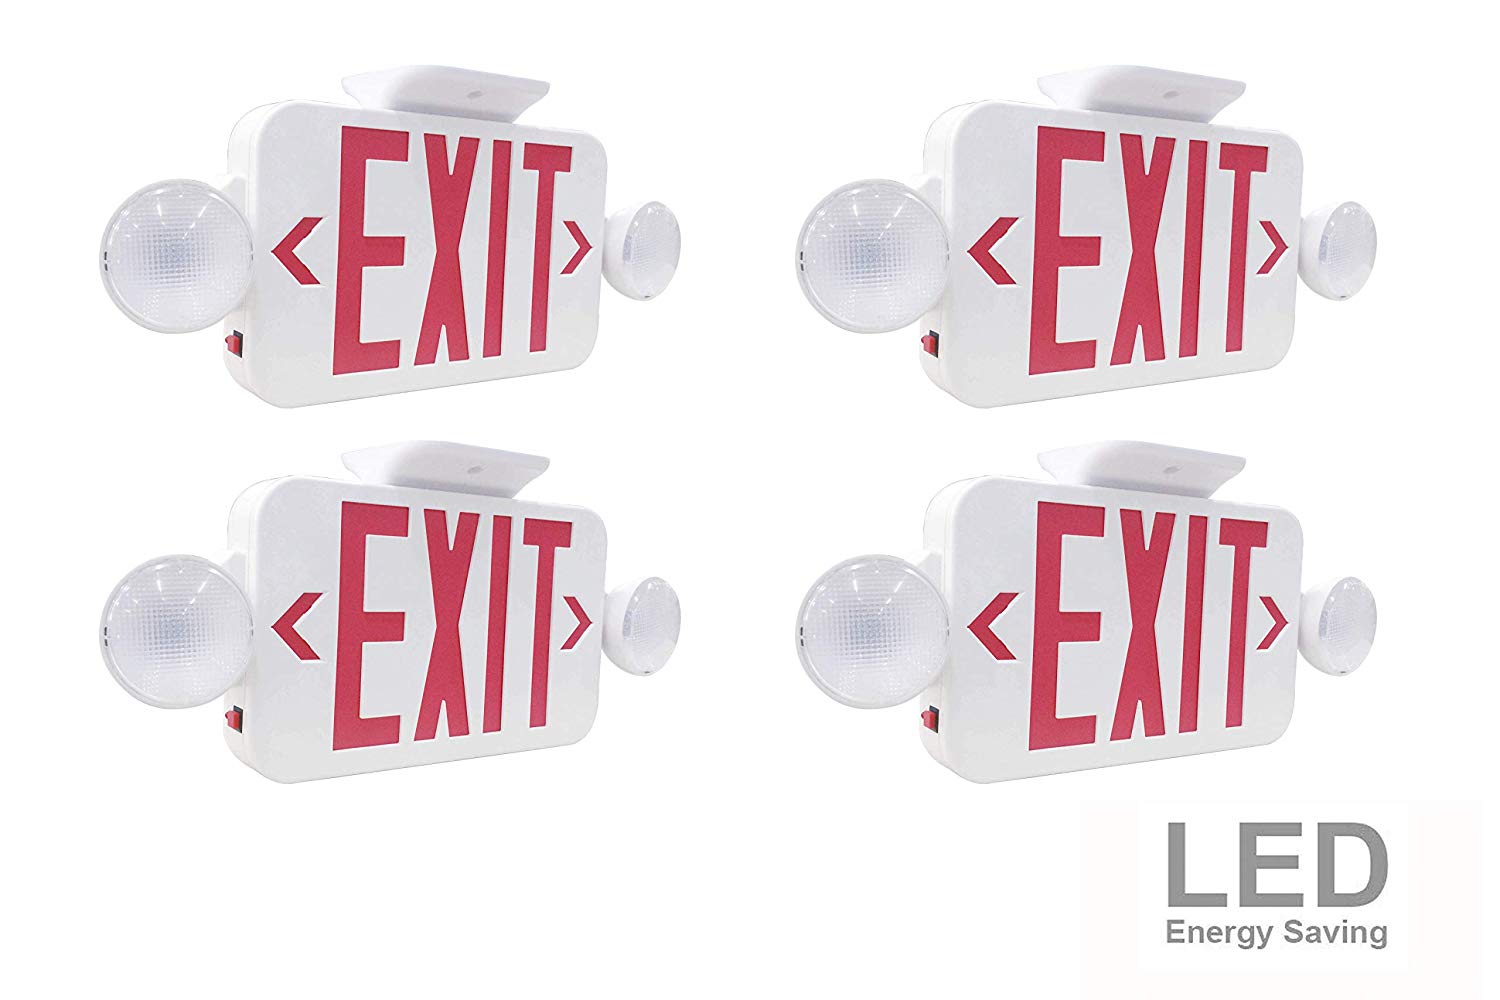 LIT-PaTH LED Combo Emergency EXIT Sign with 2 Adjustable Head Lights And Back Up Batteries- US Standard Red Letter Emergency Exit Lighting, UL 924 And CEC Qualified, 120-277 Voltage (4-Pack)